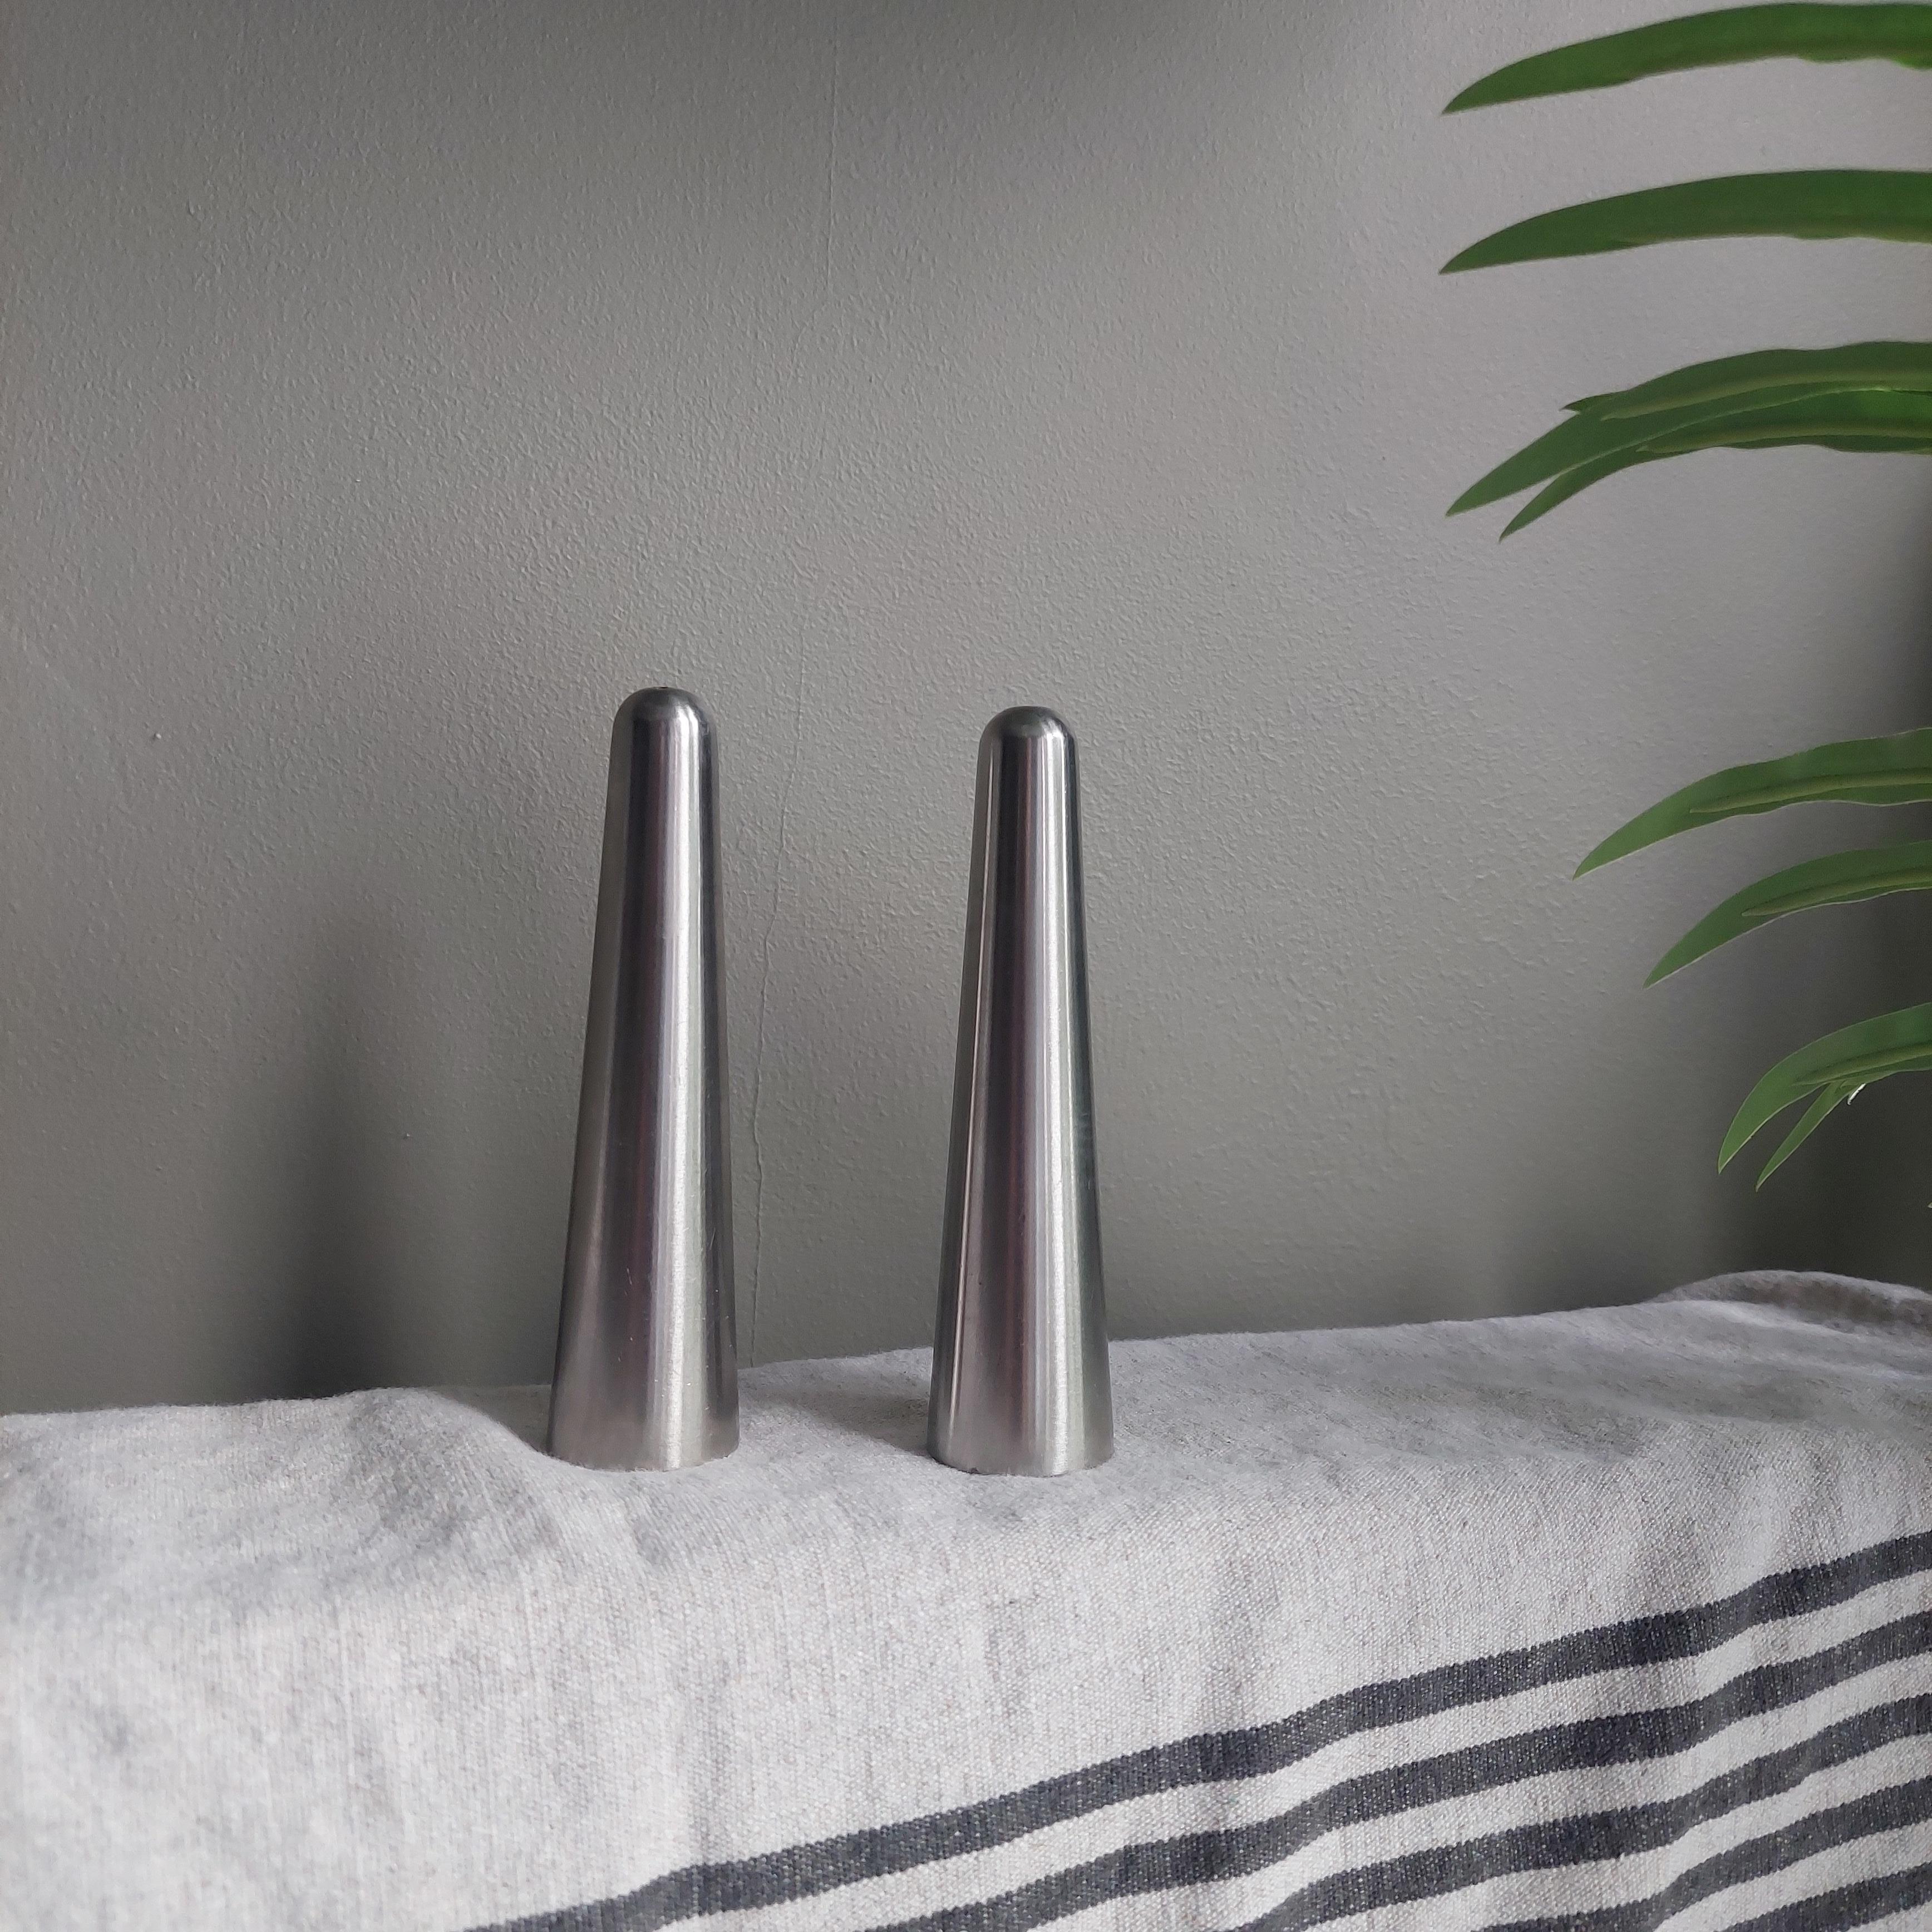 Stylish vintage mid century modern stainless steel salt and pepper cruet set designed by Robert Welch for Old Hall.

Salt and pepper shaker from the 'Campden' range, stainless steel, of tall tapered shape, made of heavy thick gauge metal so that the